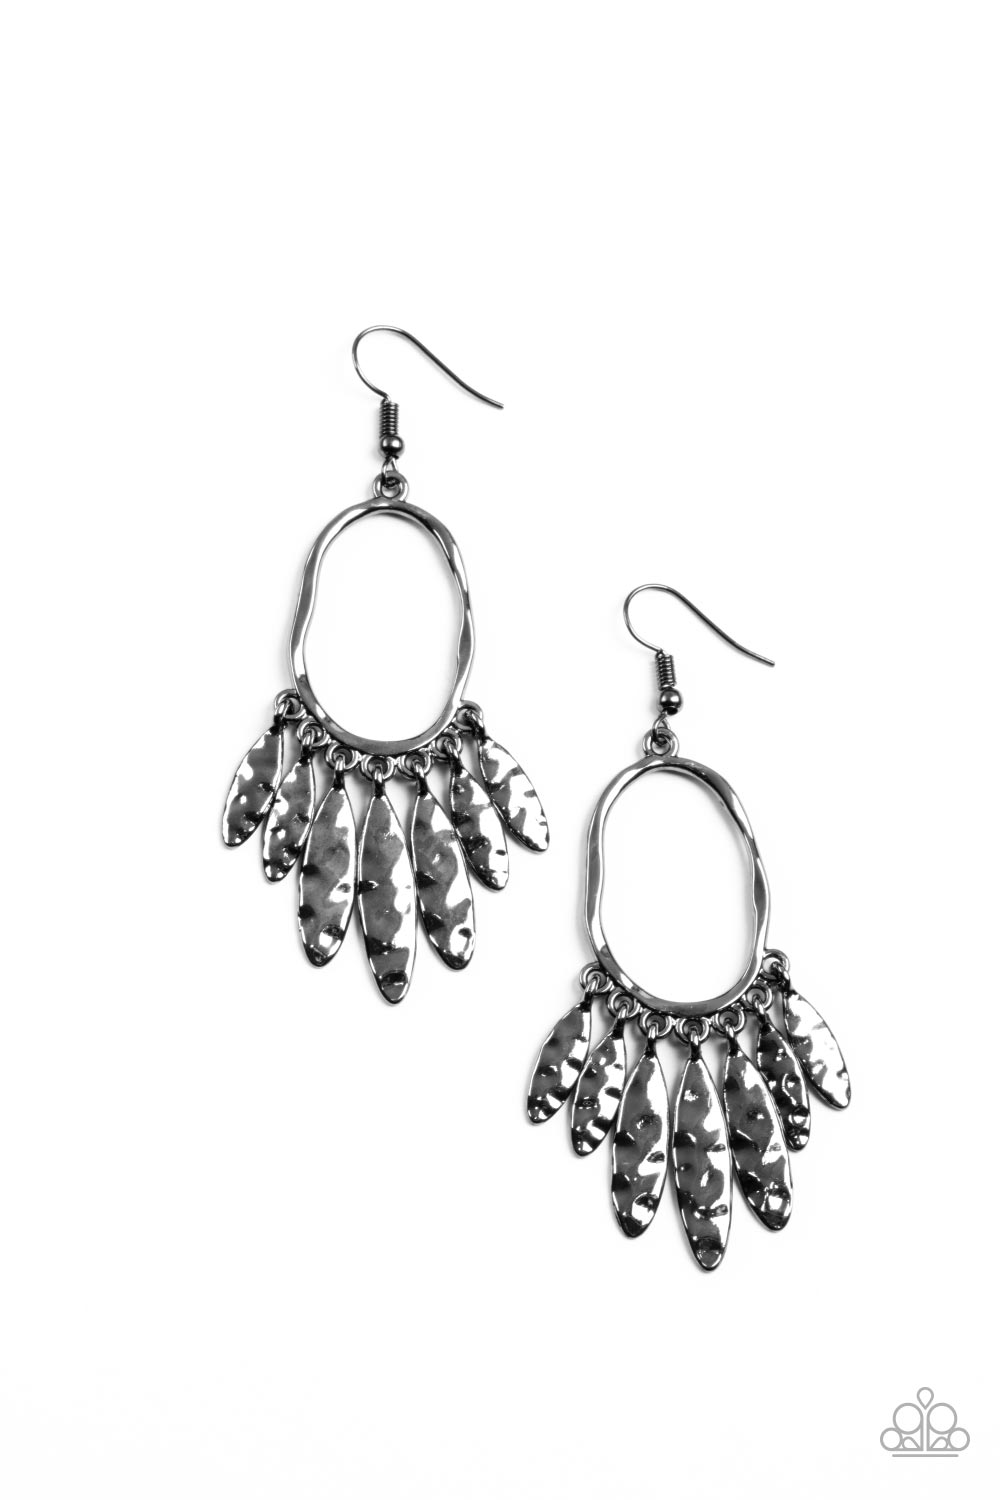 Artisan Aria Black Earring - Paparazzi Accessories Item #P5ED-BKXX-106XX A tapered fringe of hammered gunmetal oval frames swings from the bottom of a hammered oval hoop, creating a musical fringe. Earring attaches to a standard fishhook fitting.  Sold as one pair of earrings.